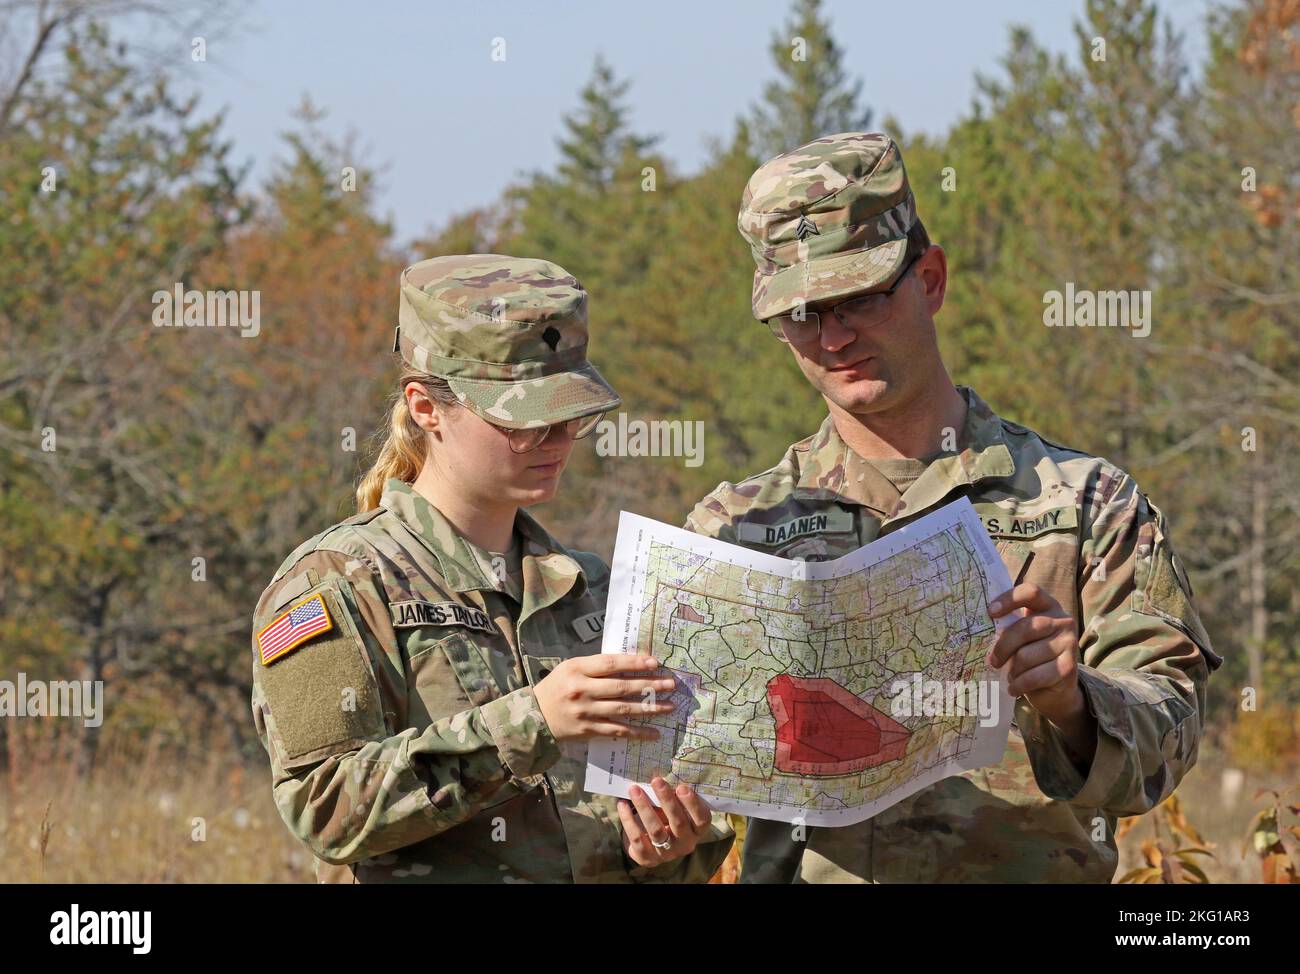 U.S. Army Reserve Spc. Haley James-Taylor and Sgt. Brandon Daanen, both assigned to the 395th Ordnance Company, 103rd Sustainment Command (Expeditionary) based in Appleton, Wis., double check their points on a map during land navigation familiarization training on Fort McCoy, Wis., Oct. 21, 2022. Stock Photo